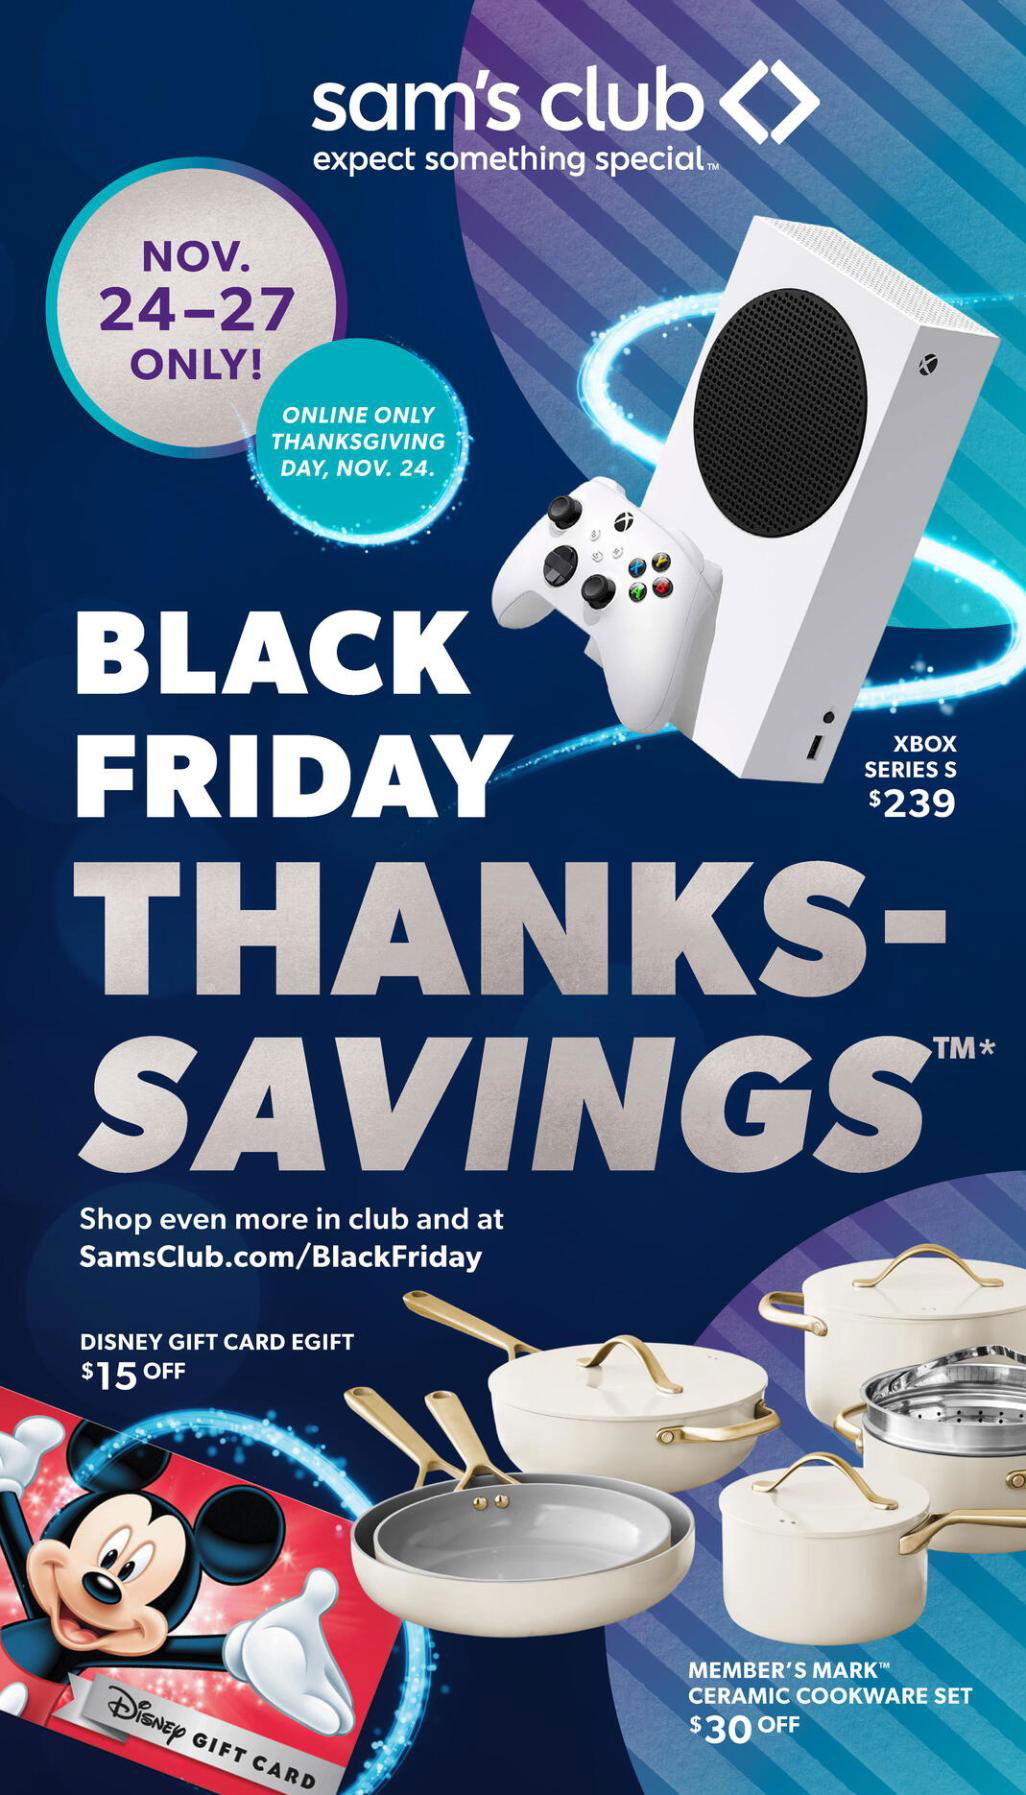 Sam's Club Black Friday Ad, Sale Info, and Deals for 2022 - Does Ross Have Any Black Friday Deals